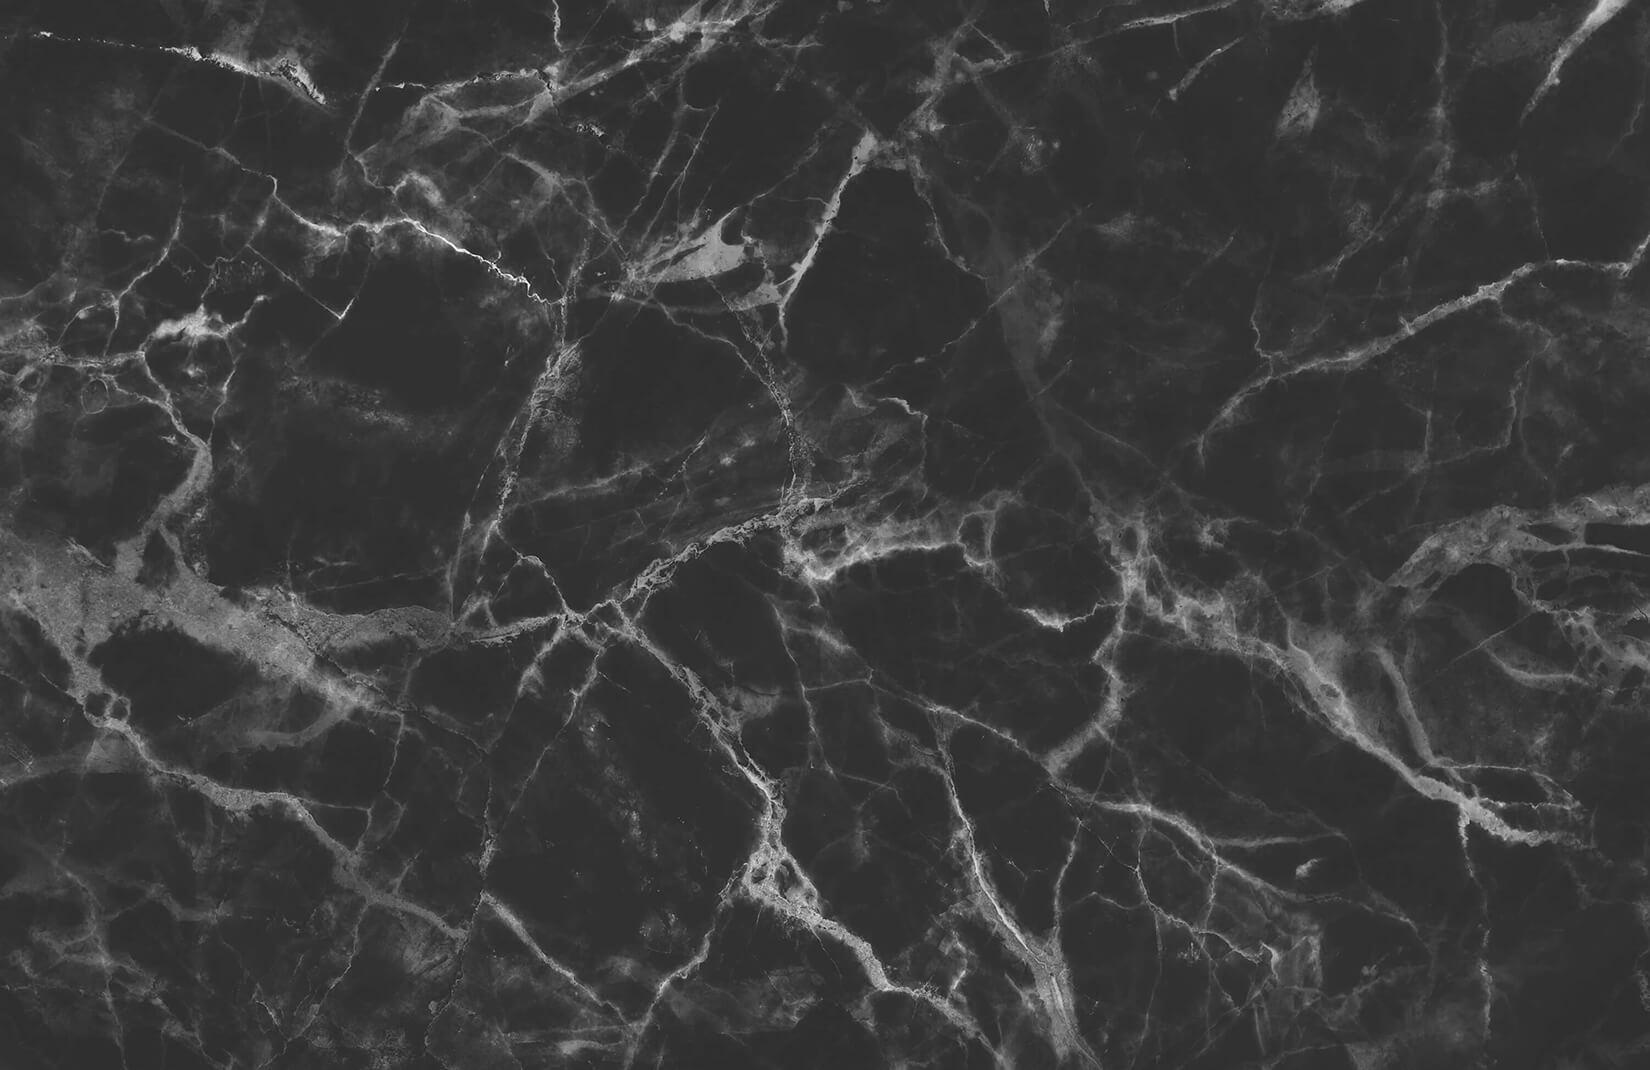 Black Marble Wallpaper. Cool Marble Effect